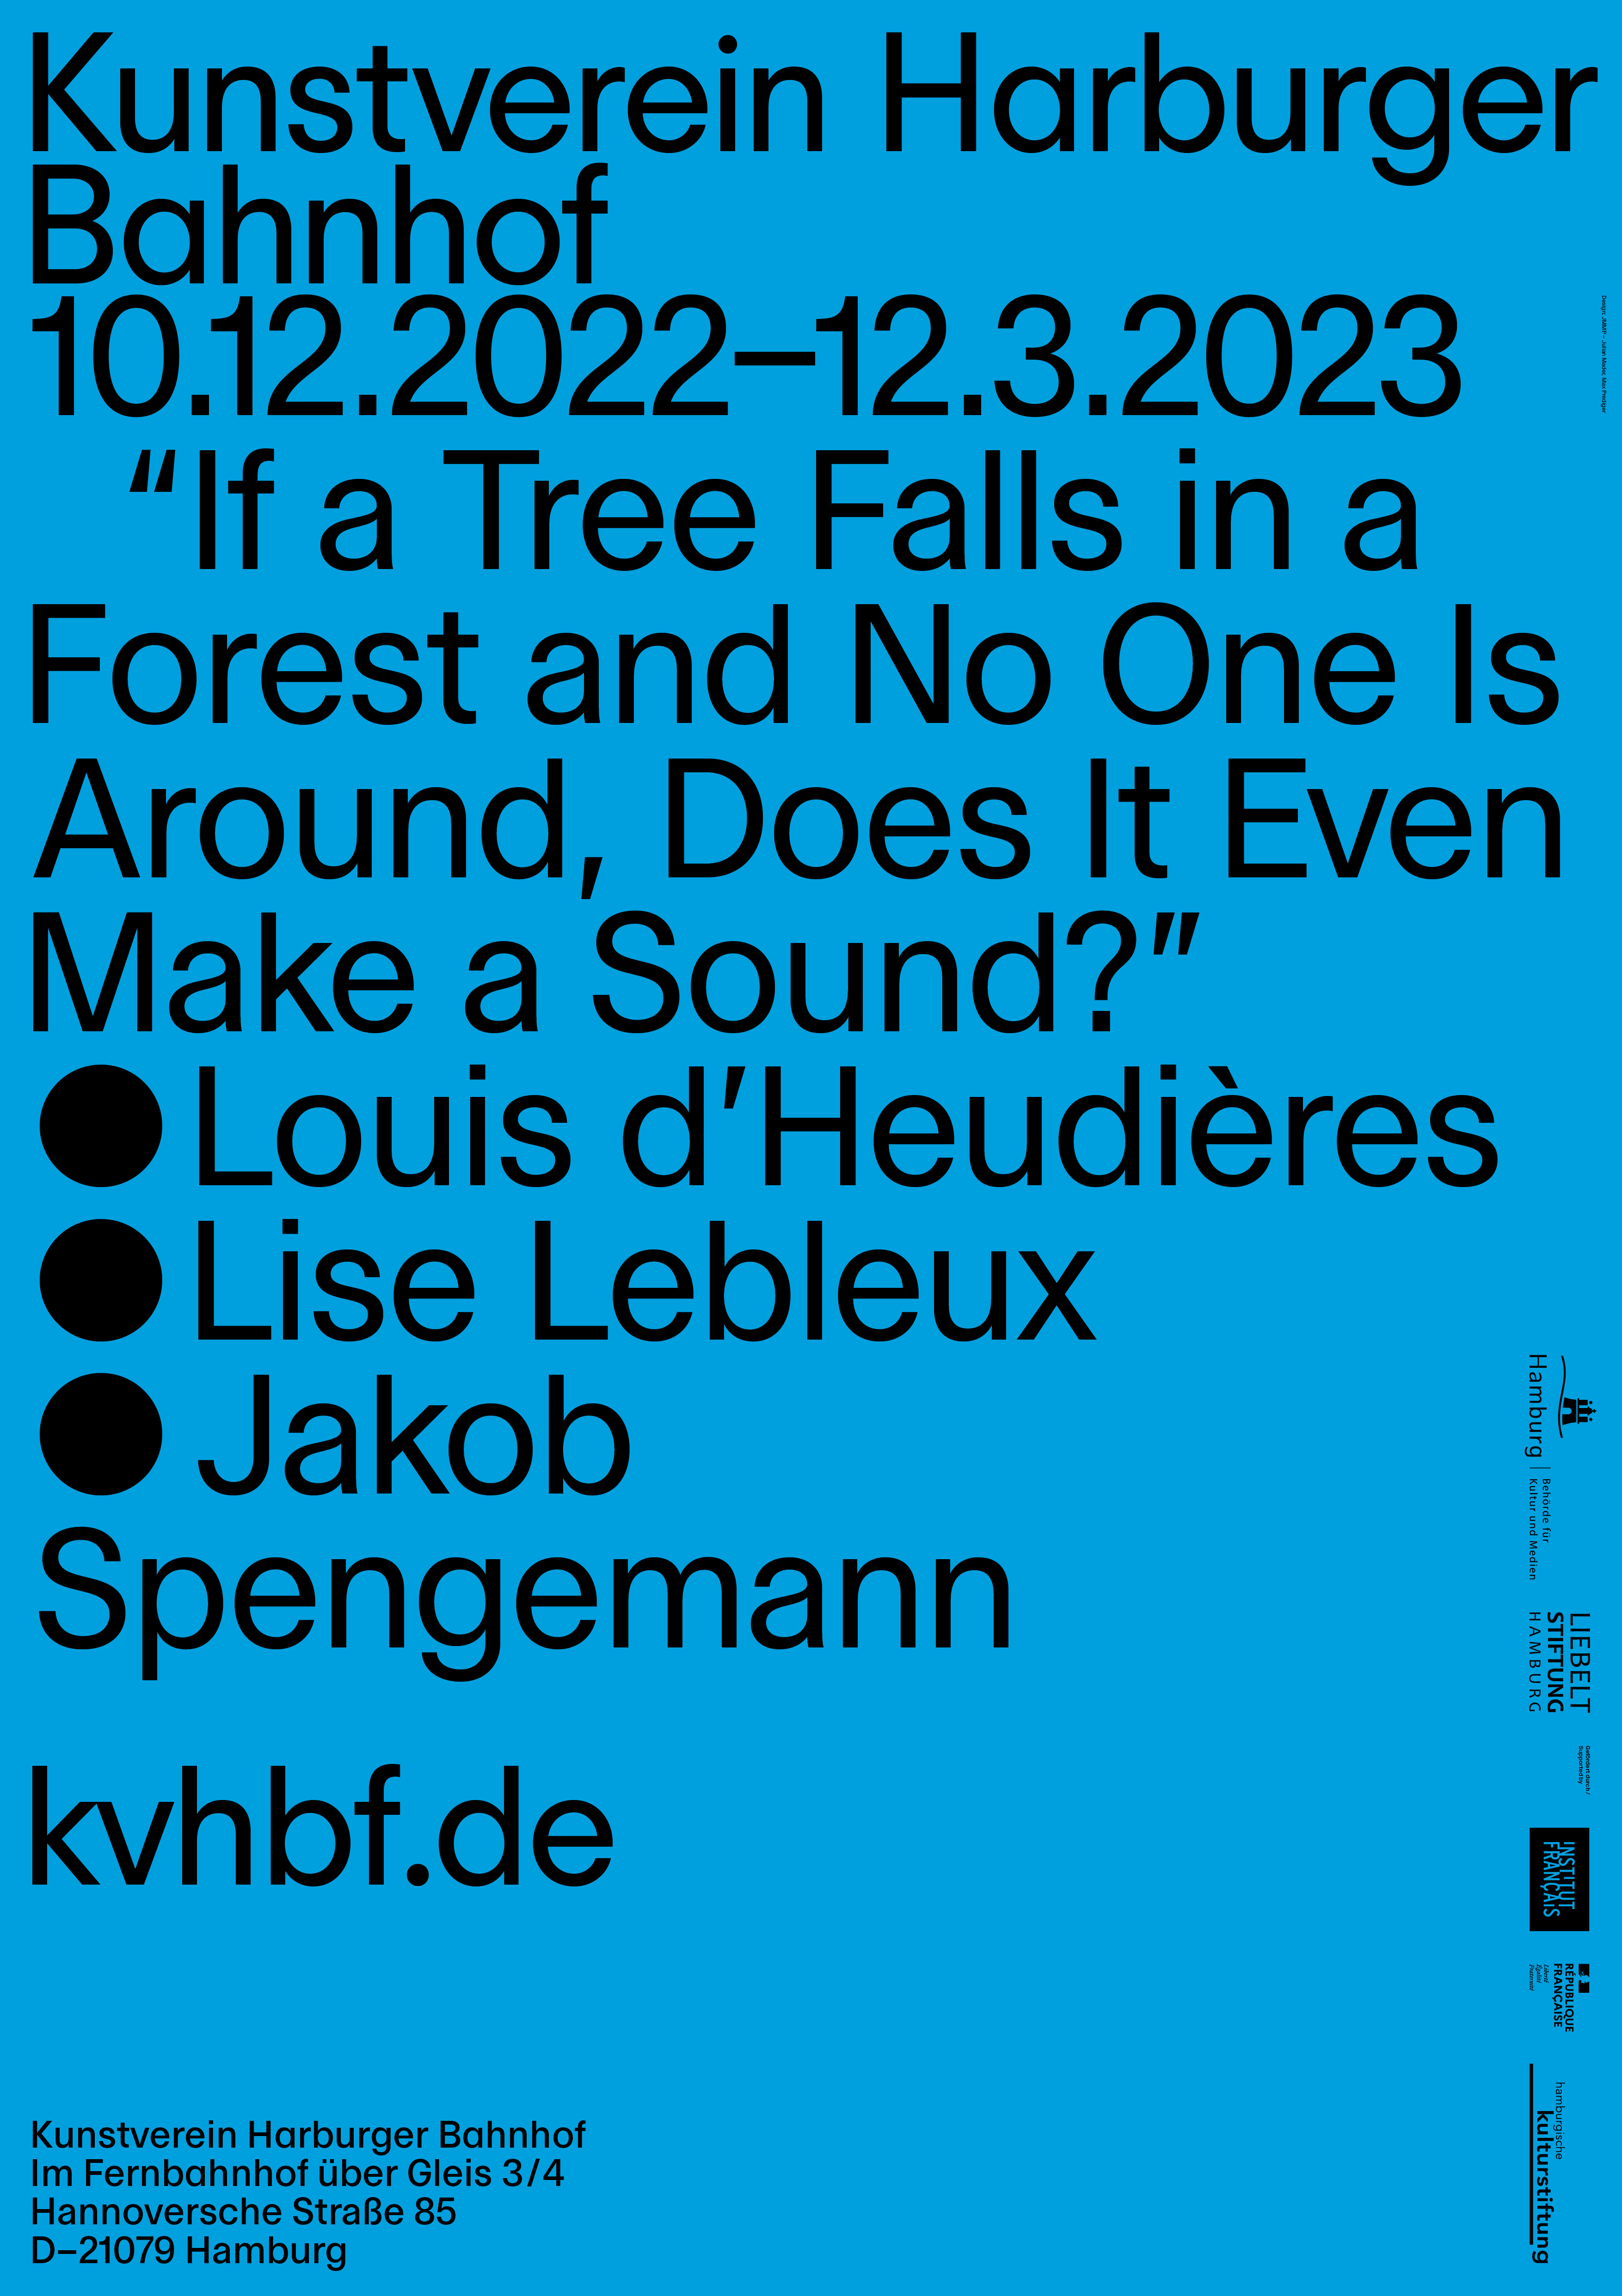 KvHBf If a Tree Falls in a Forest Plakat 02 MP If a Tree Falls in a Forest and No One Is Around, Does It Even Make a Sound?